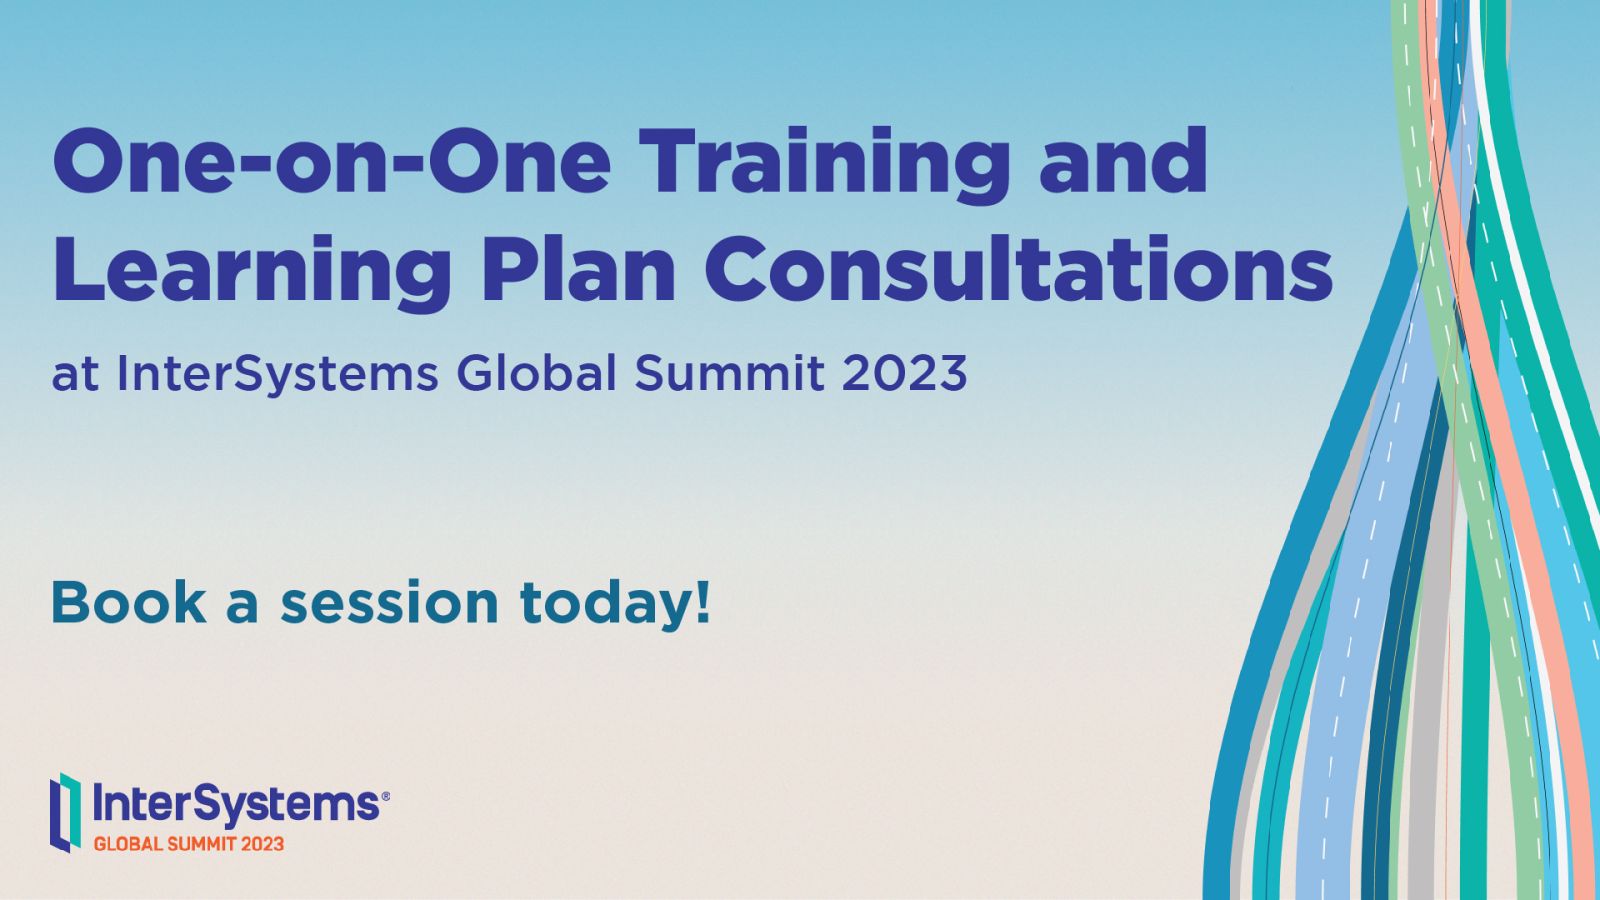 One-on-One Training and Learning Plan Contultations at Global Summit 2023. Book a session today!